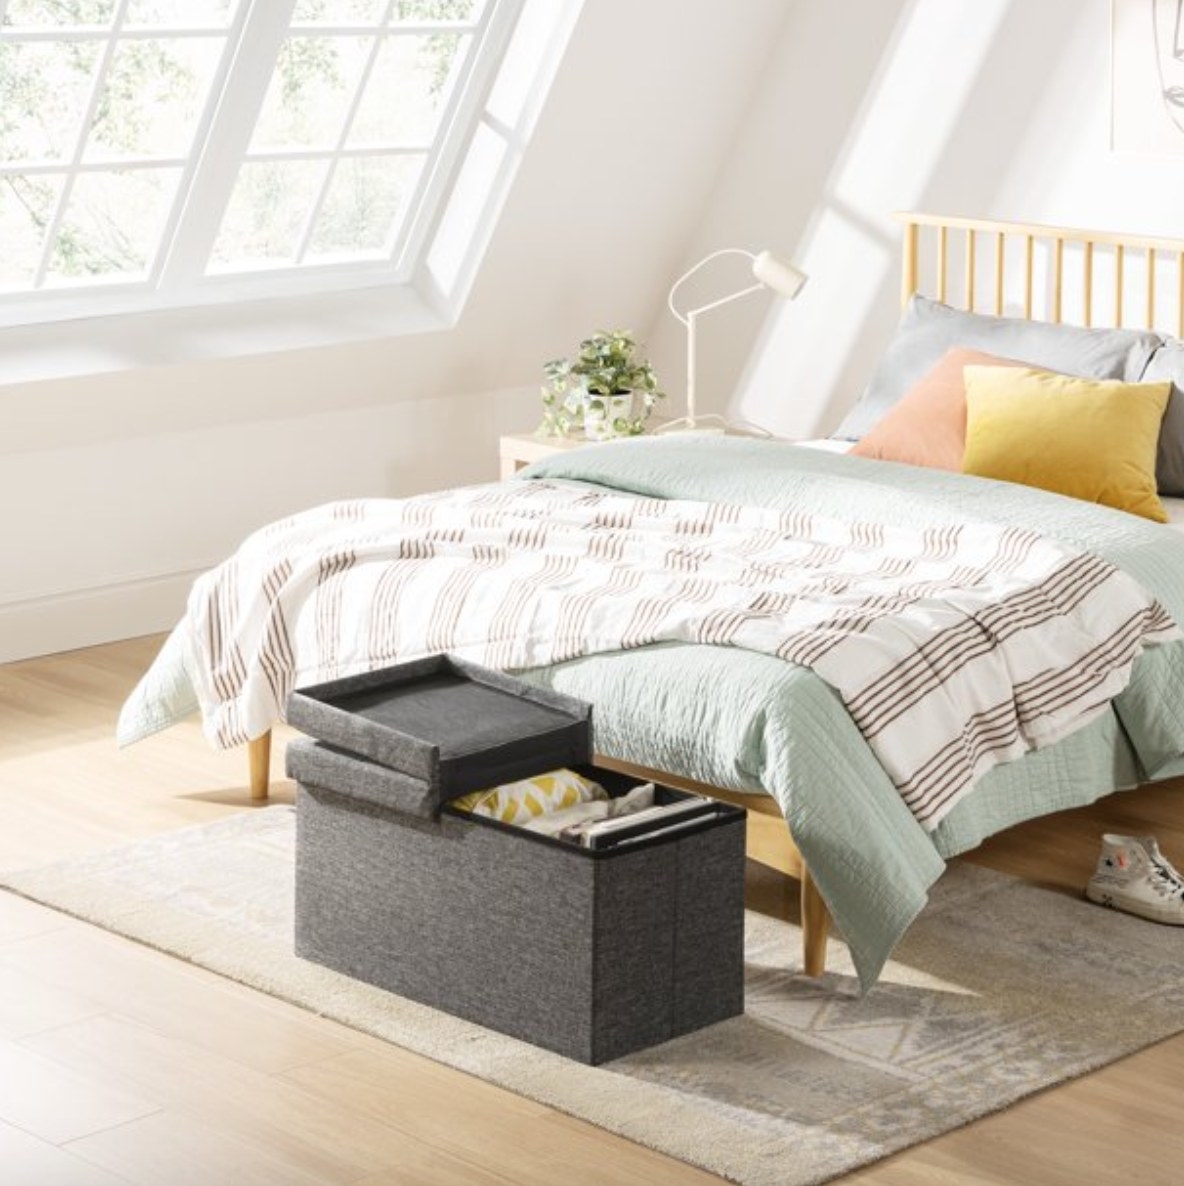 a bedroom with a made bed and a ottoman with a removable top for storage